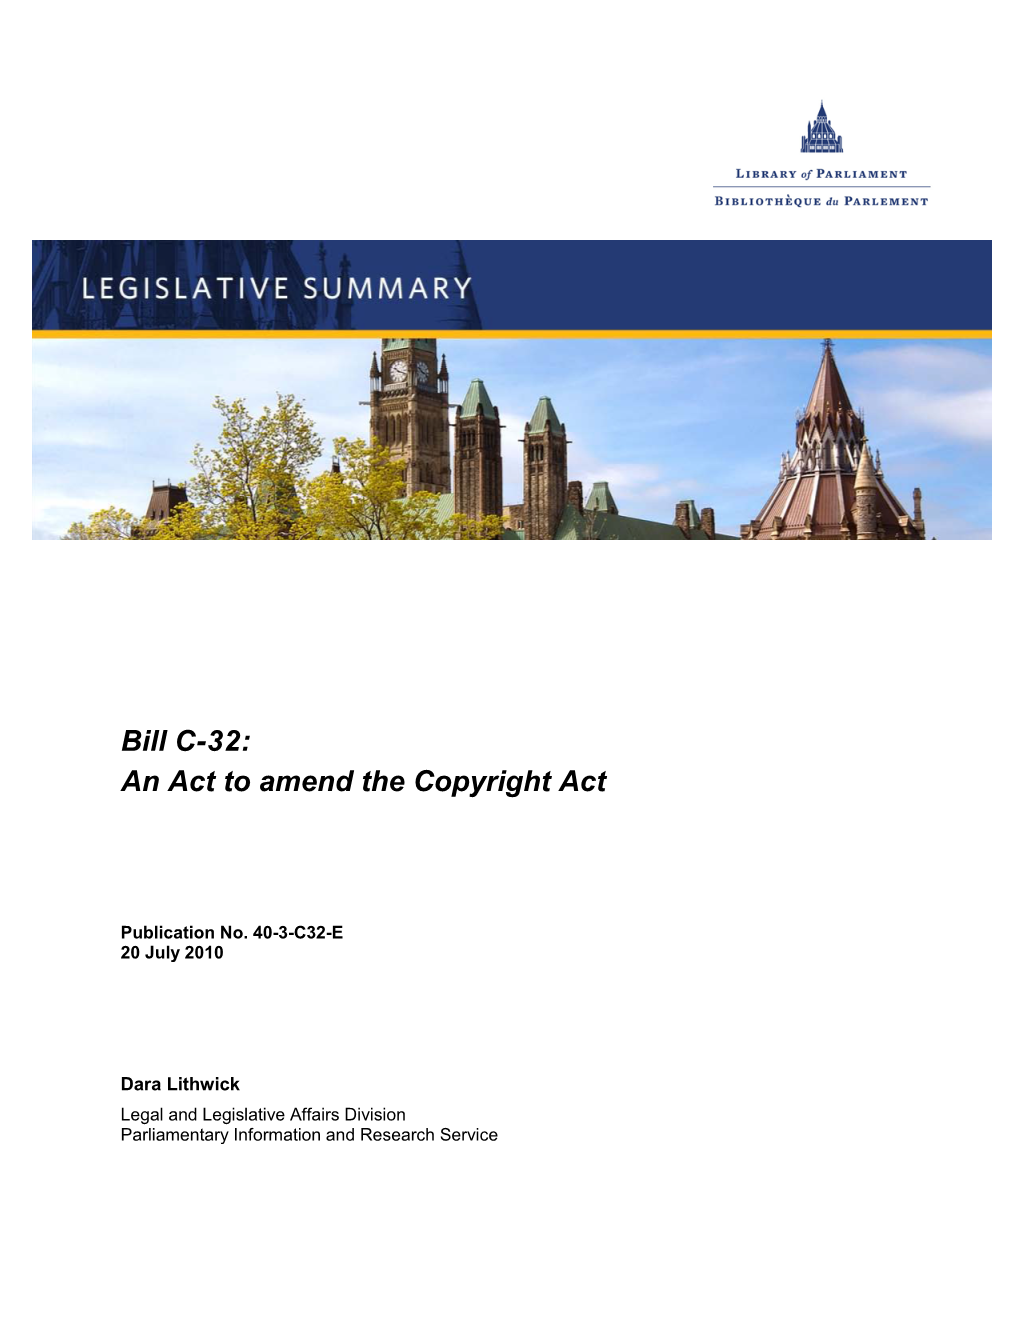 An Act to Amend the Copyright Act